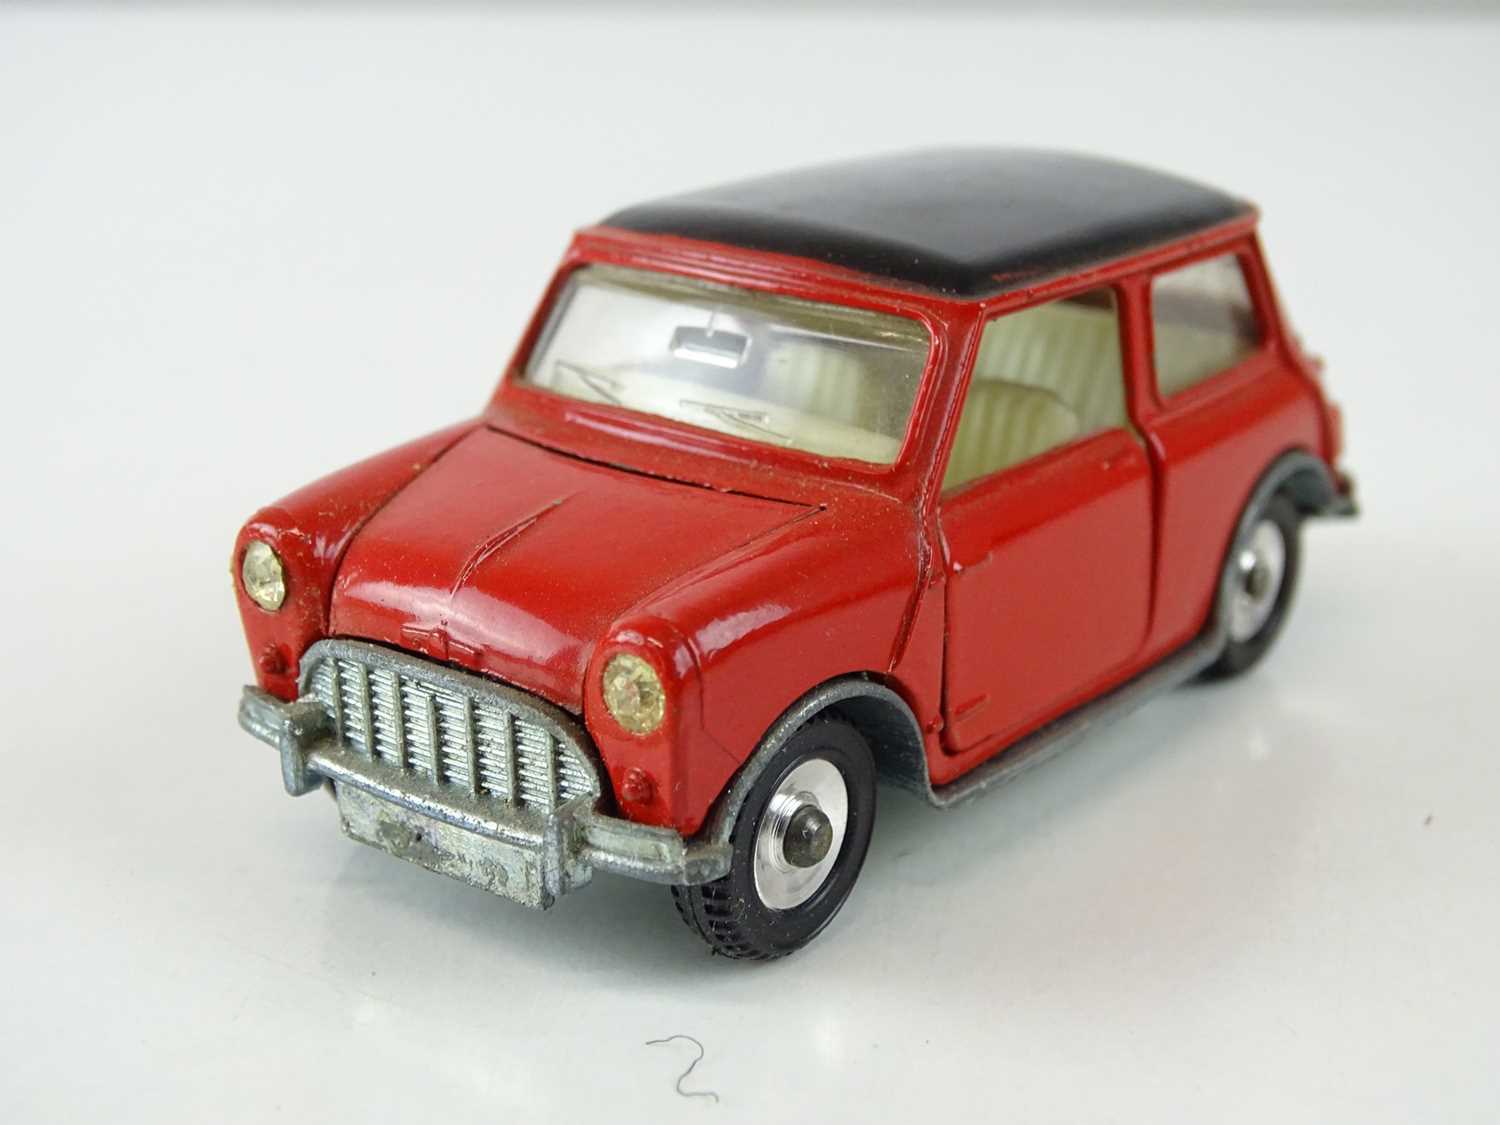 Lot 17 - A DINKY 183 Morris Mini-Minor (automatic) in...